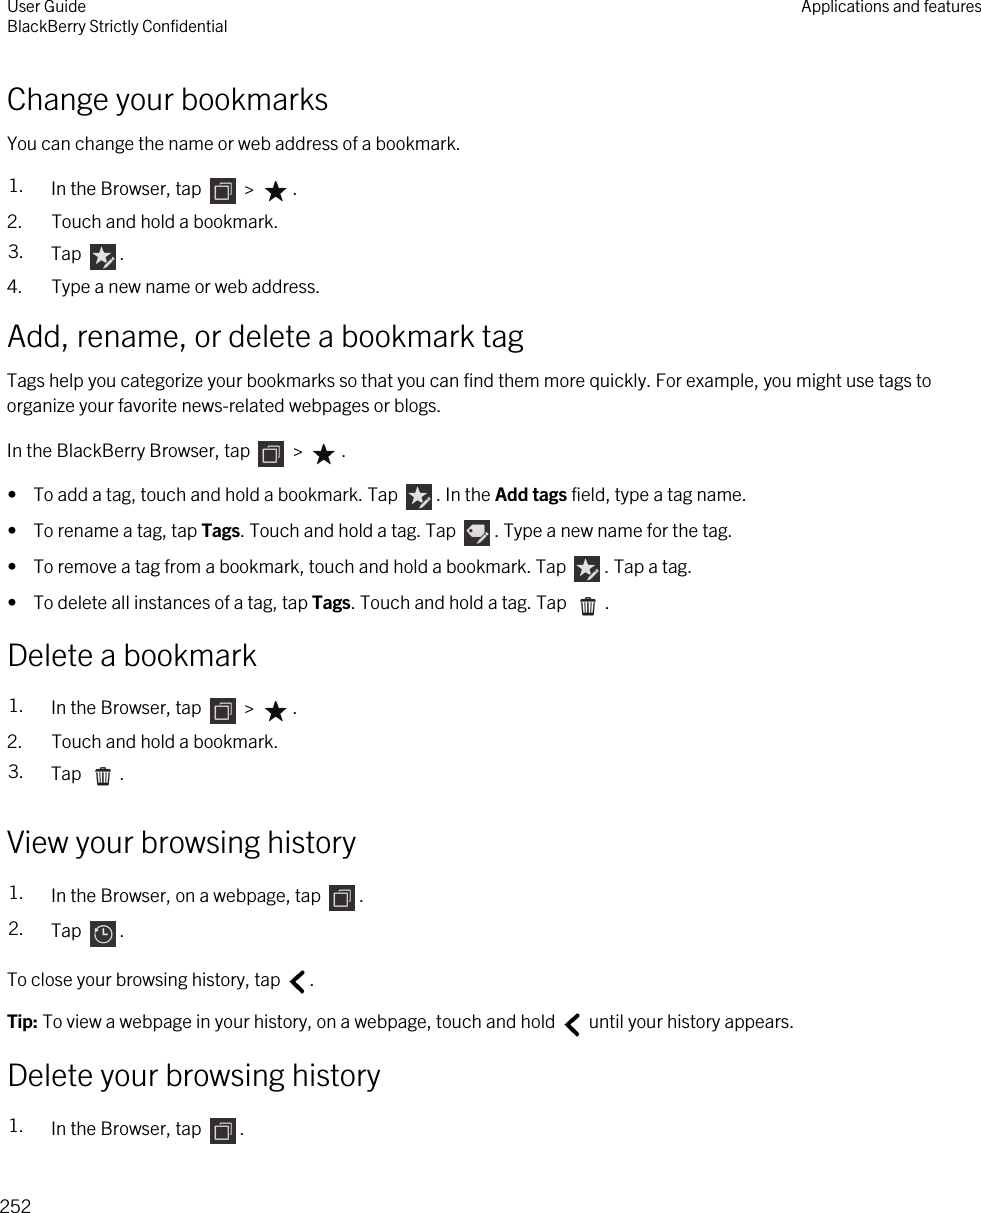 Change your bookmarksYou can change the name or web address of a bookmark.1. In the Browser, tap   &gt;  .2. Touch and hold a bookmark.3. Tap  .4. Type a new name or web address.Add, rename, or delete a bookmark tagTags help you categorize your bookmarks so that you can find them more quickly. For example, you might use tags to organize your favorite news-related webpages or blogs.In the BlackBerry Browser, tap   &gt;  .•  To add a tag, touch and hold a bookmark. Tap  . In the Add tags field, type a tag name.•  To rename a tag, tap Tags. Touch and hold a tag. Tap  . Type a new name for the tag.•  To remove a tag from a bookmark, touch and hold a bookmark. Tap  . Tap a tag.•  To delete all instances of a tag, tap Tags. Touch and hold a tag. Tap  .Delete a bookmark1. In the Browser, tap   &gt;  .2. Touch and hold a bookmark.3. Tap  .View your browsing history1. In the Browser, on a webpage, tap  .2. Tap  .To close your browsing history, tap  .Tip: To view a webpage in your history, on a webpage, touch and hold   until your history appears.Delete your browsing history1. In the Browser, tap  .User GuideBlackBerry Strictly Confidential Applications and features252